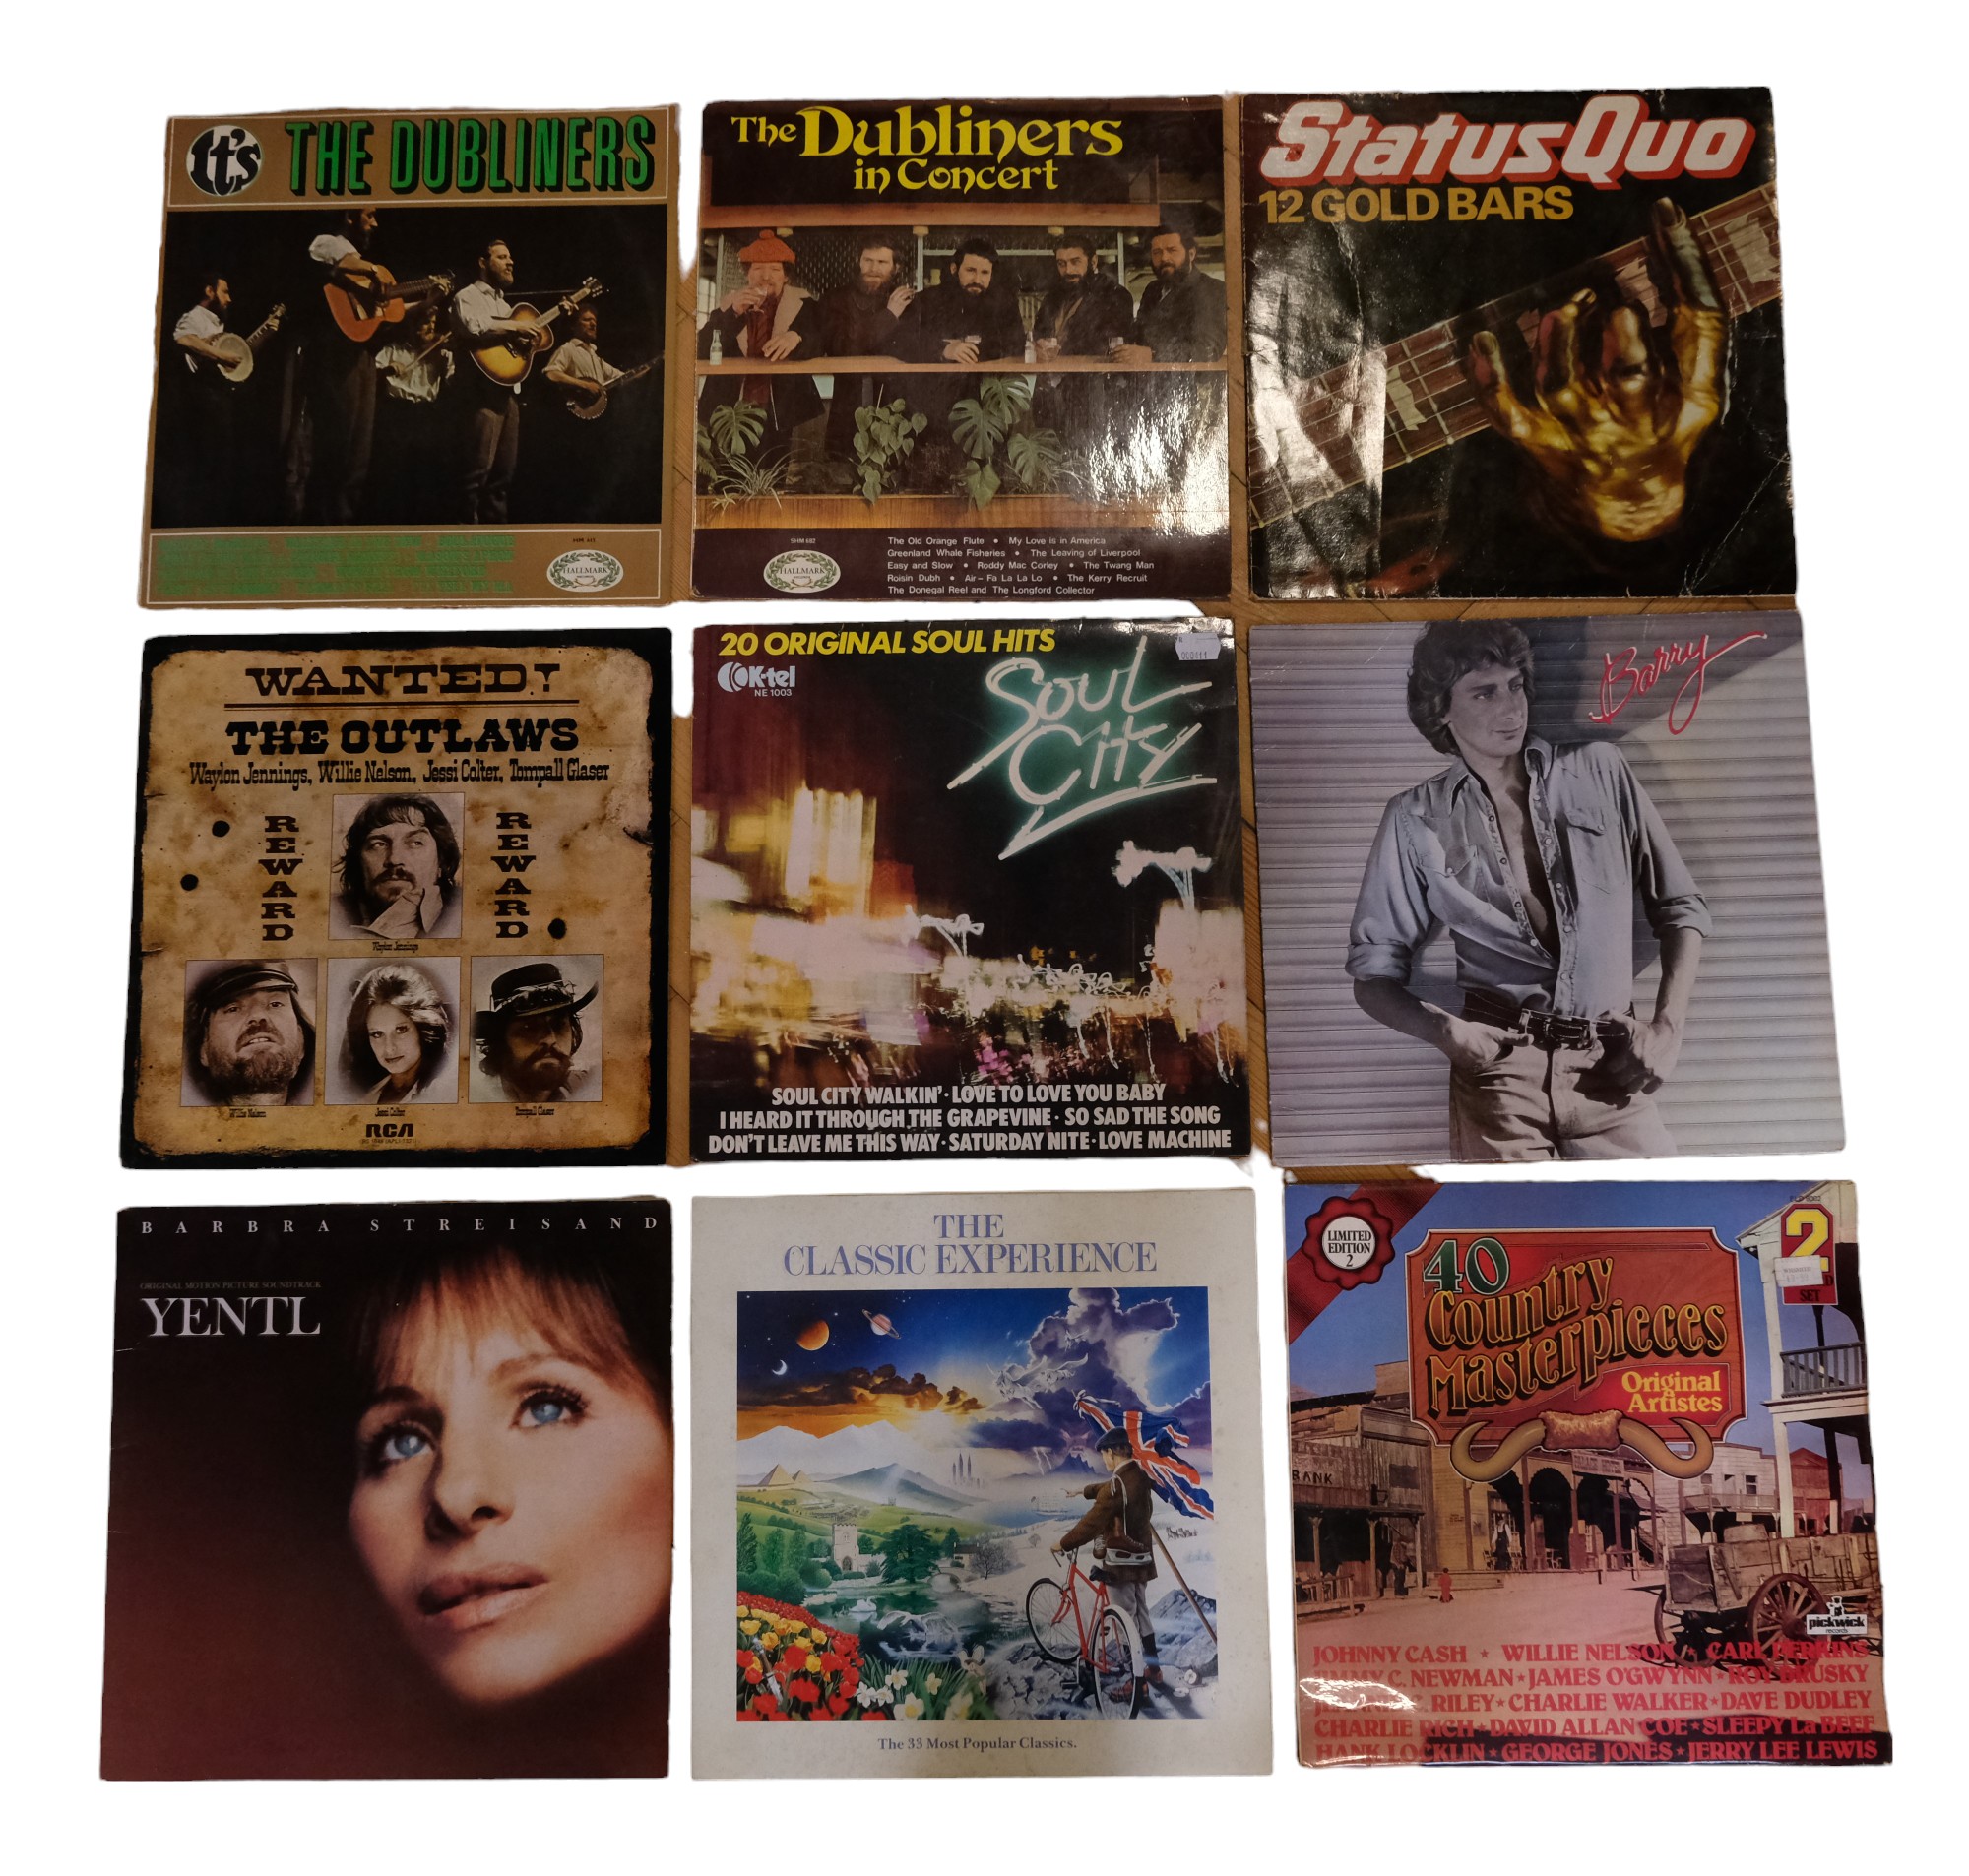 A quantity of vinyl record albums and singles including Madonna, Fleetwood Mac, Status Quo, etc - Image 2 of 6